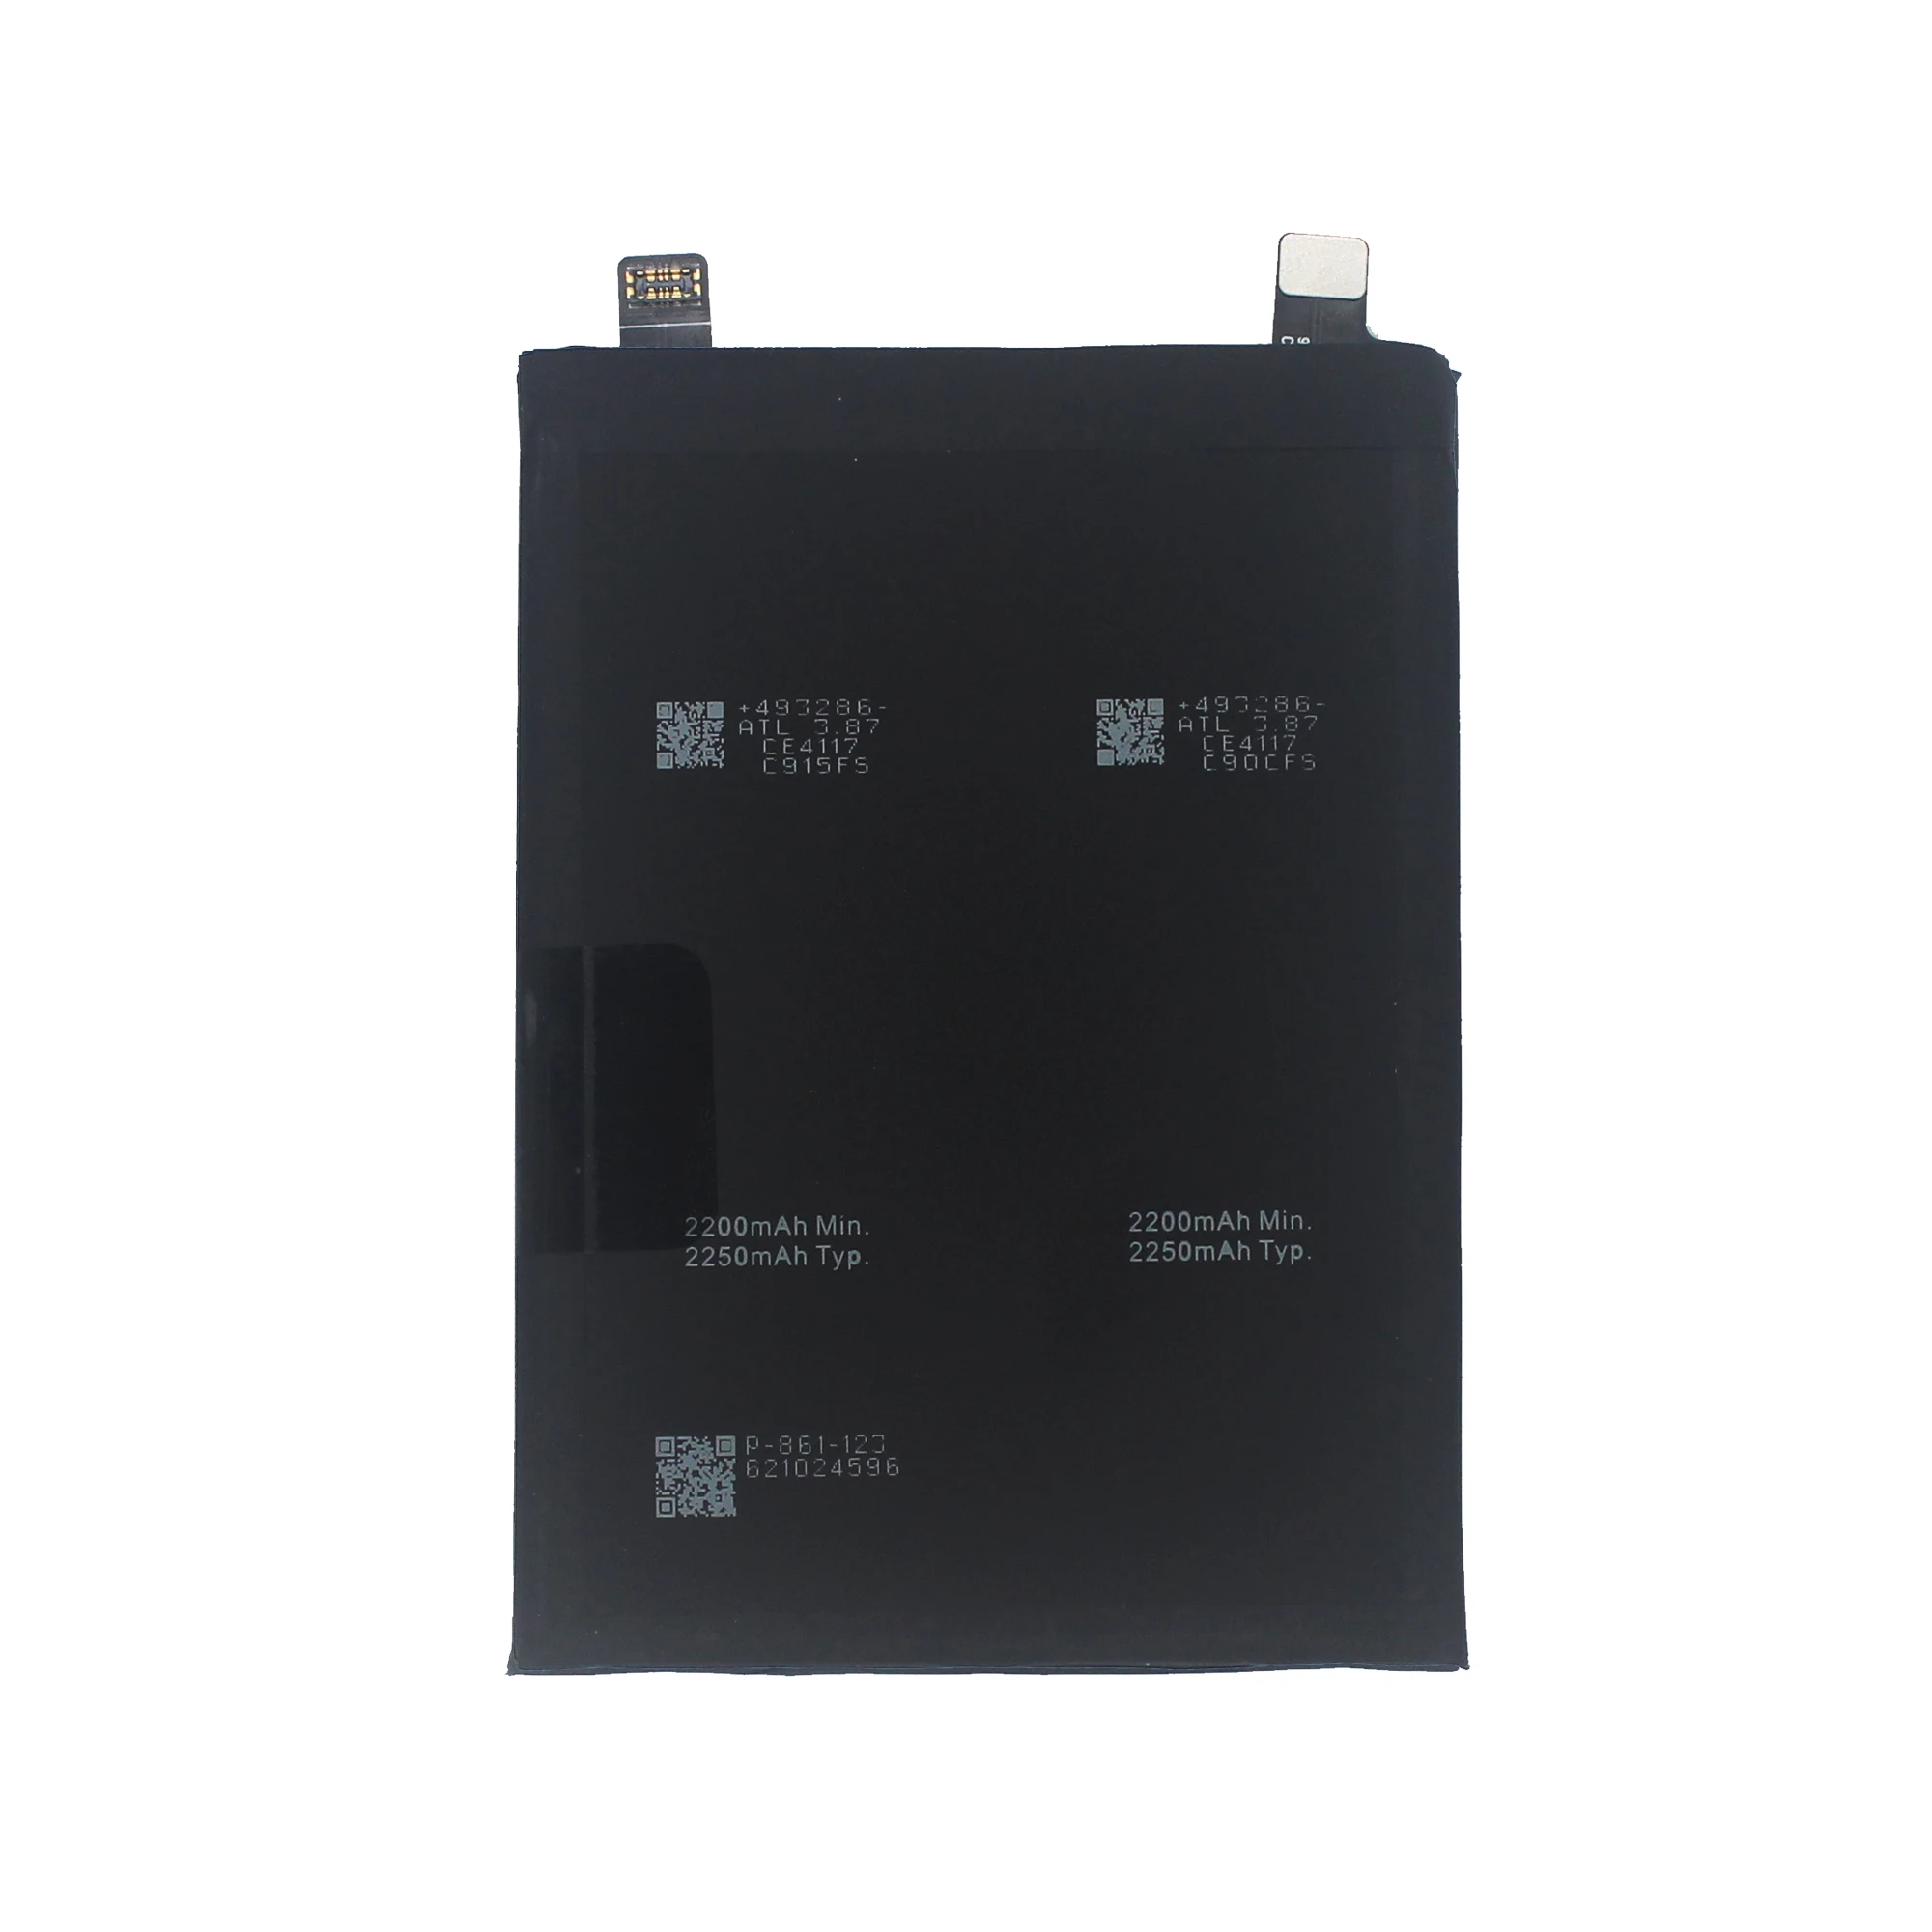 Compatible For OPPO / 1+ nord2 BLP861 4500mAh Phone Battery Series enlarge